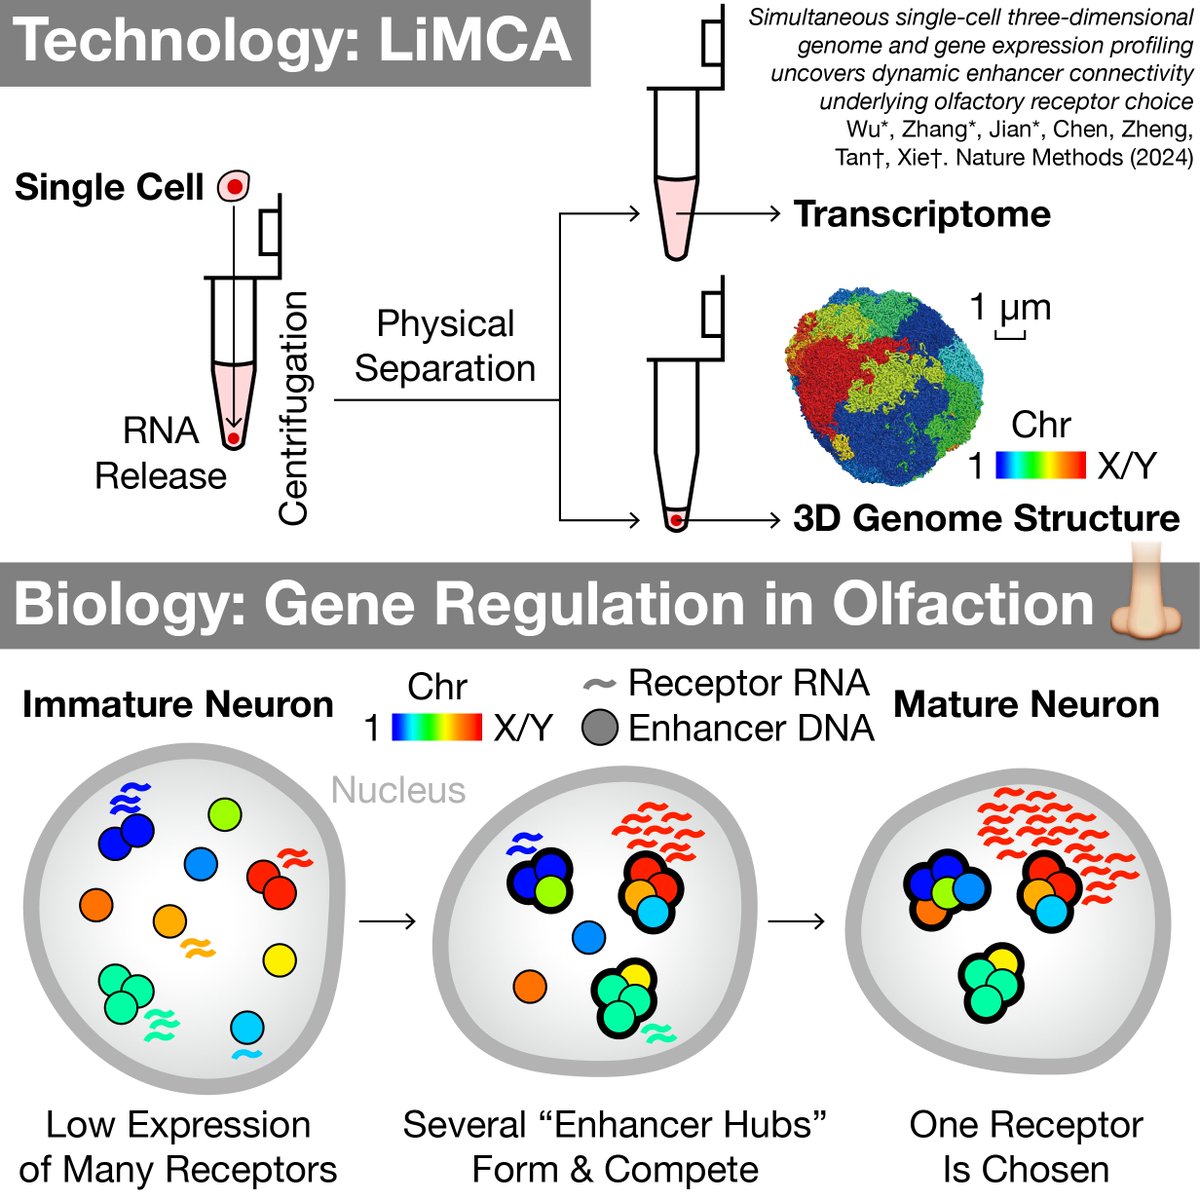 To understand the true relationship between 3D genome structure and gene expression, we measured both from the same cell with unparalleled sensitivity. Our LiMCA @biorxivpreprint is now published in @naturemethods (with News & Views by dear @LomvardasLab): nature.com/articles/s4159…